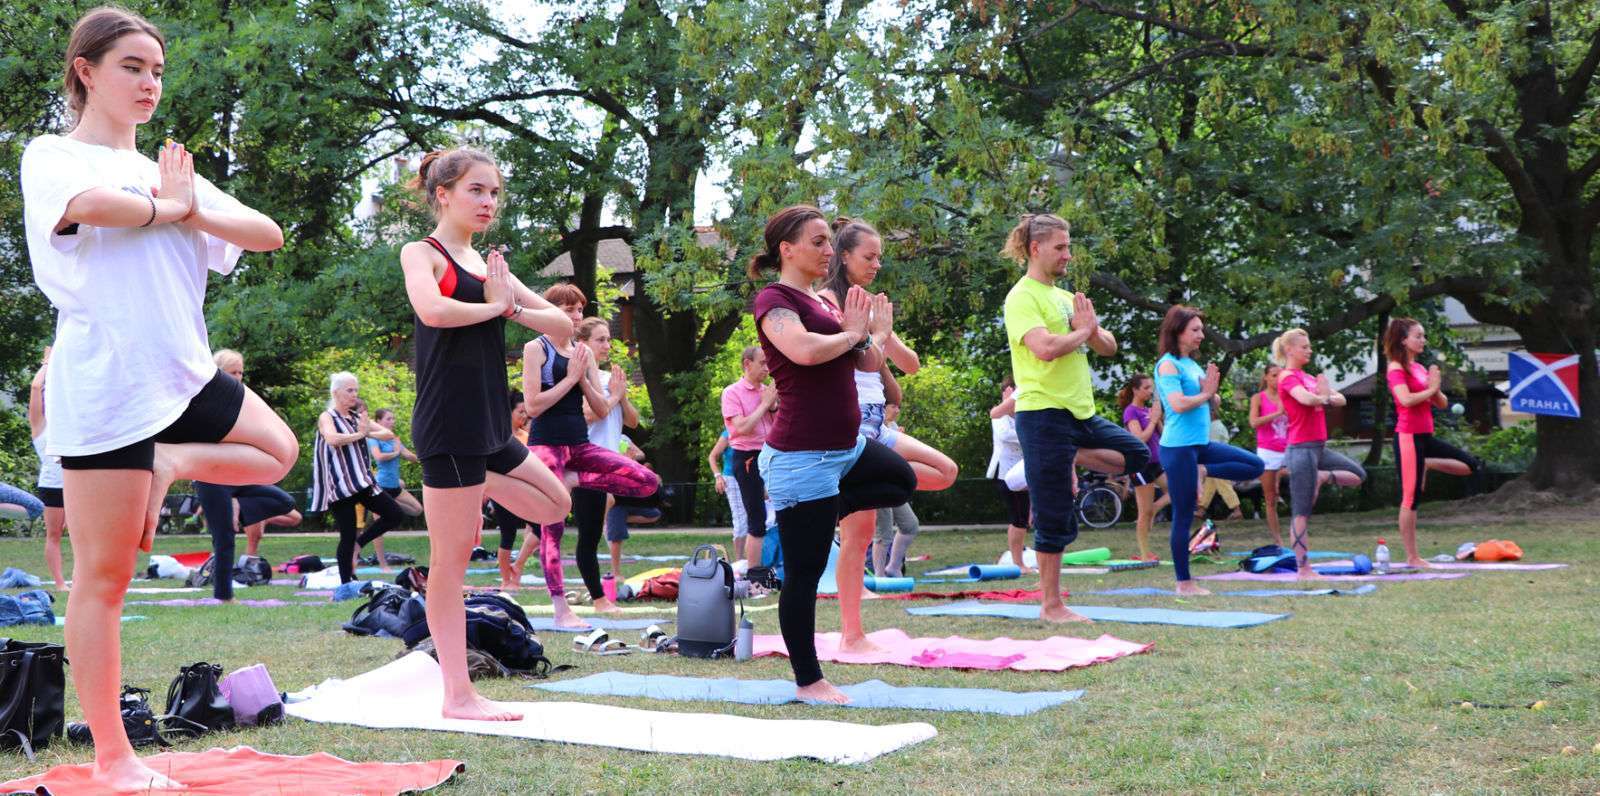 Yoga at Kampa Park – Practice yoga with us 2019